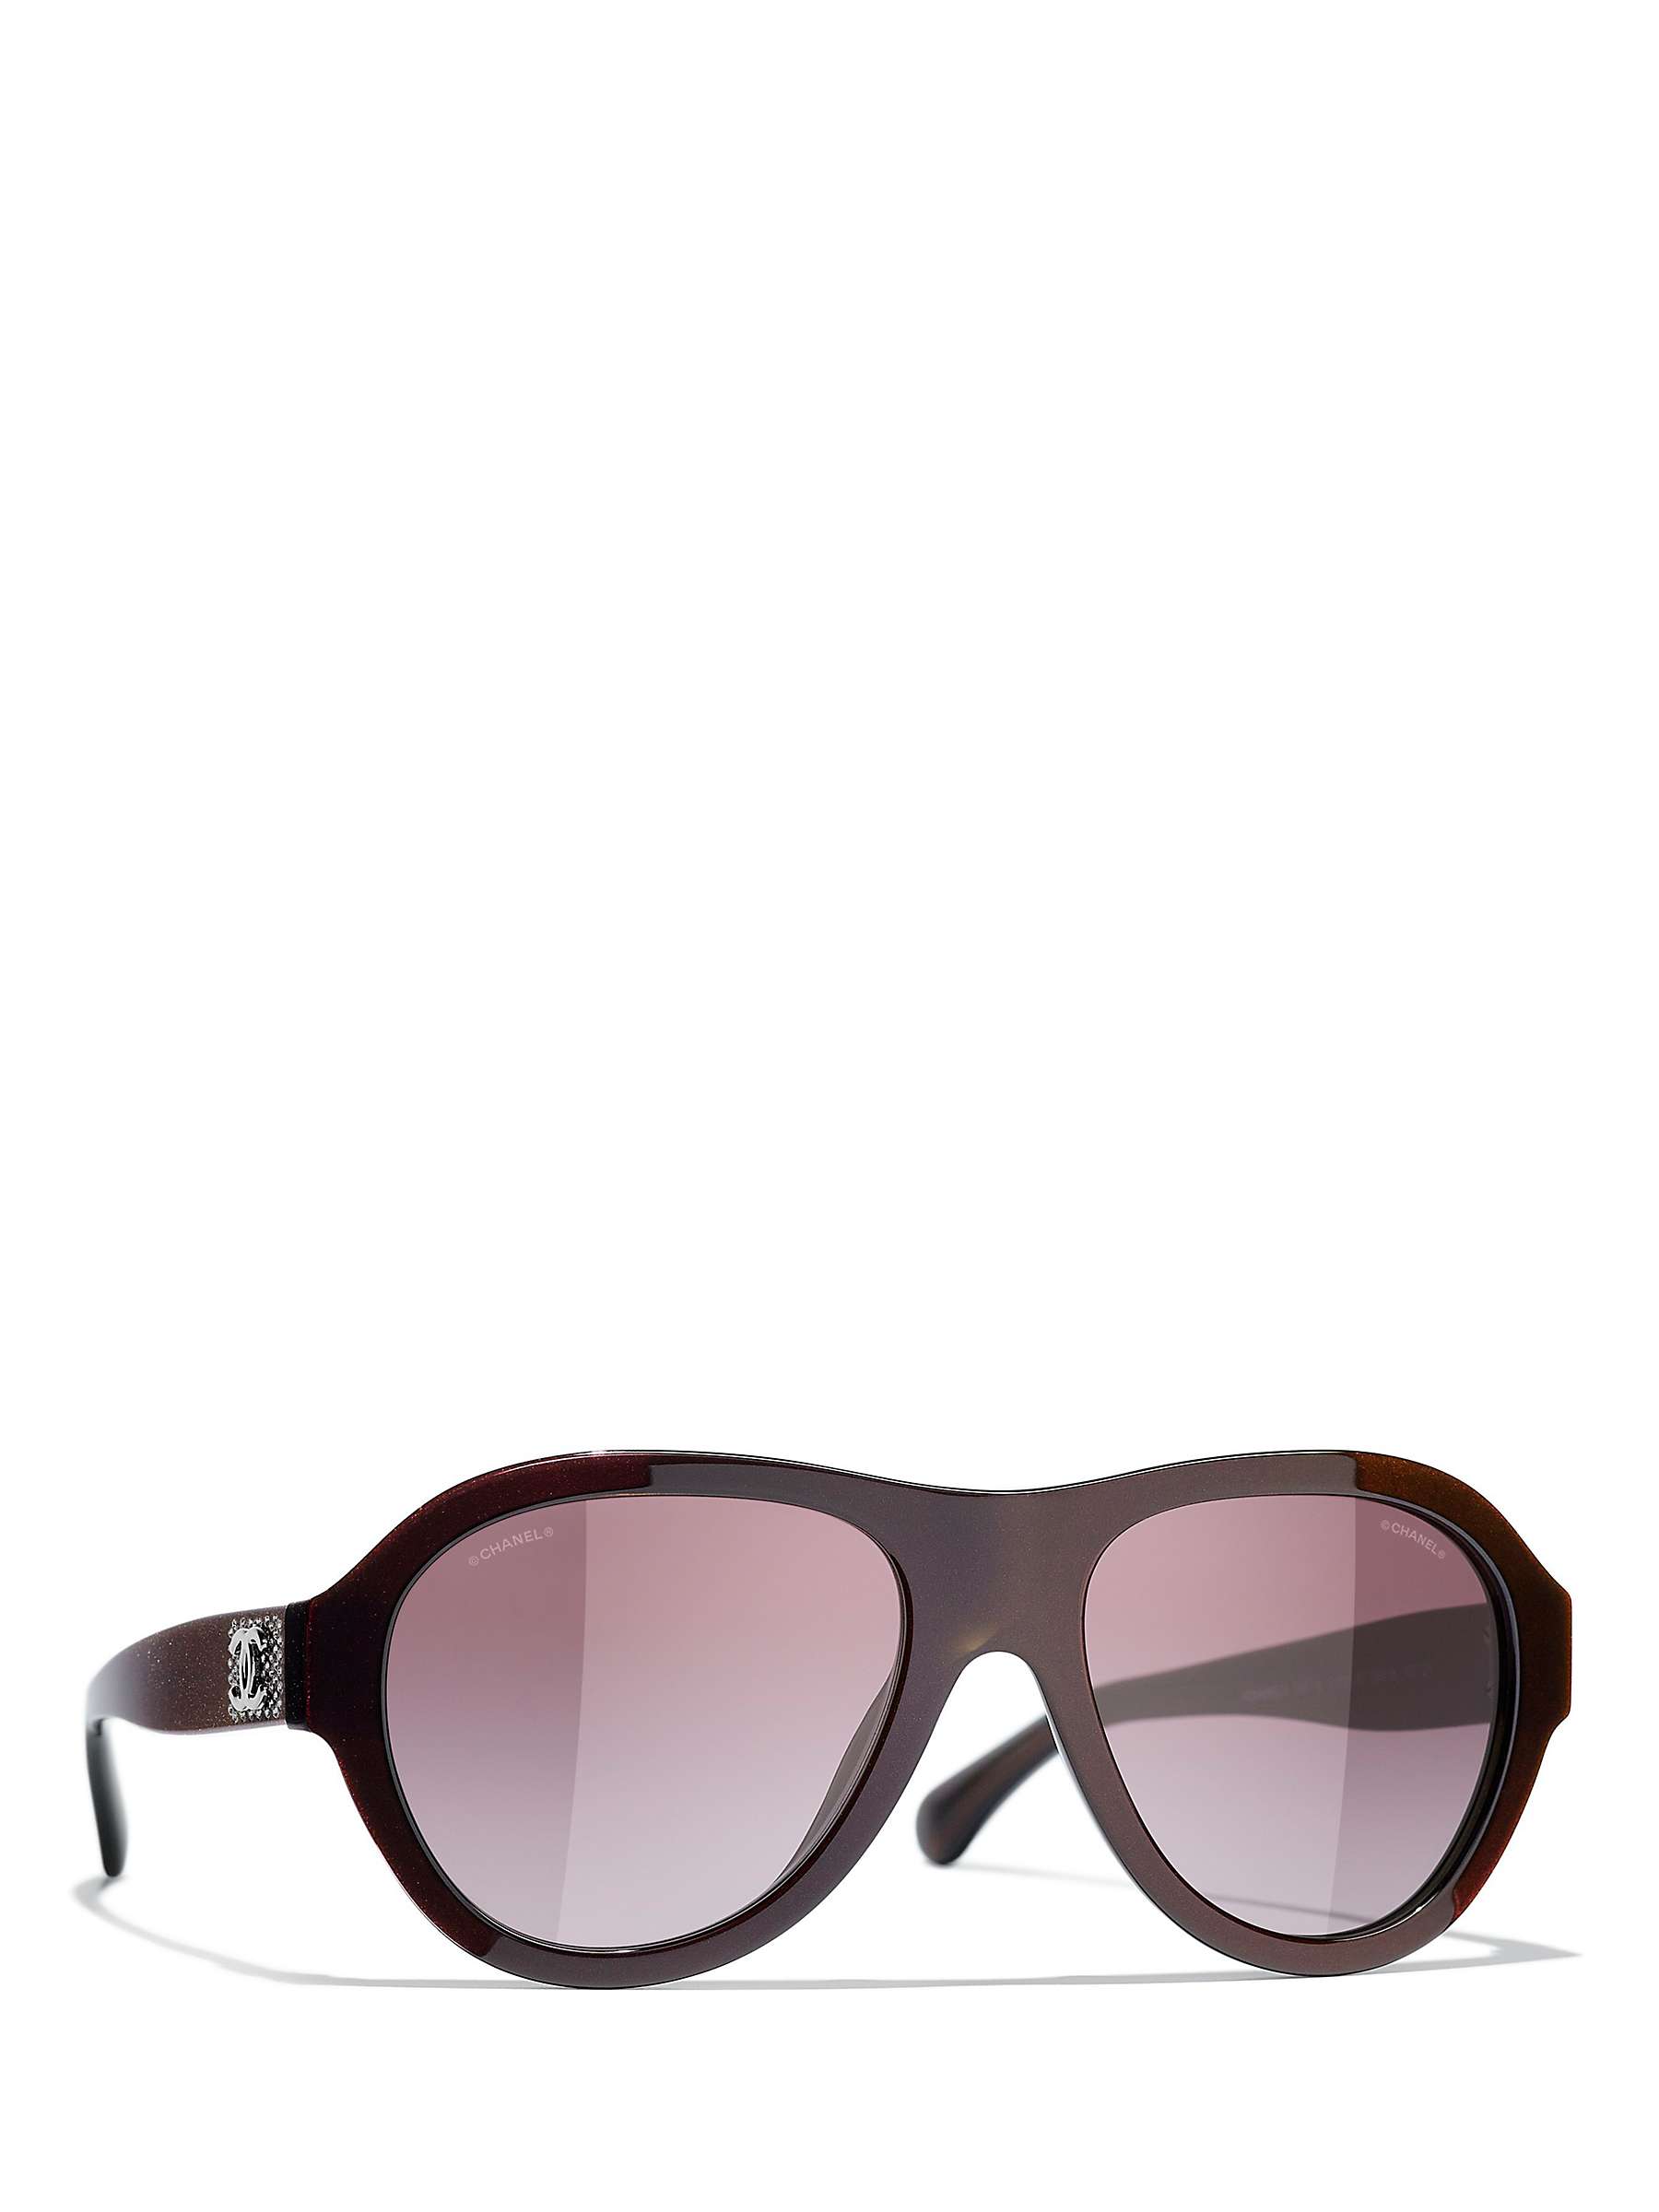 Buy CHANEL Oval Sunglasses CH5467B Iridescent Red/Violet Gradient Online at johnlewis.com